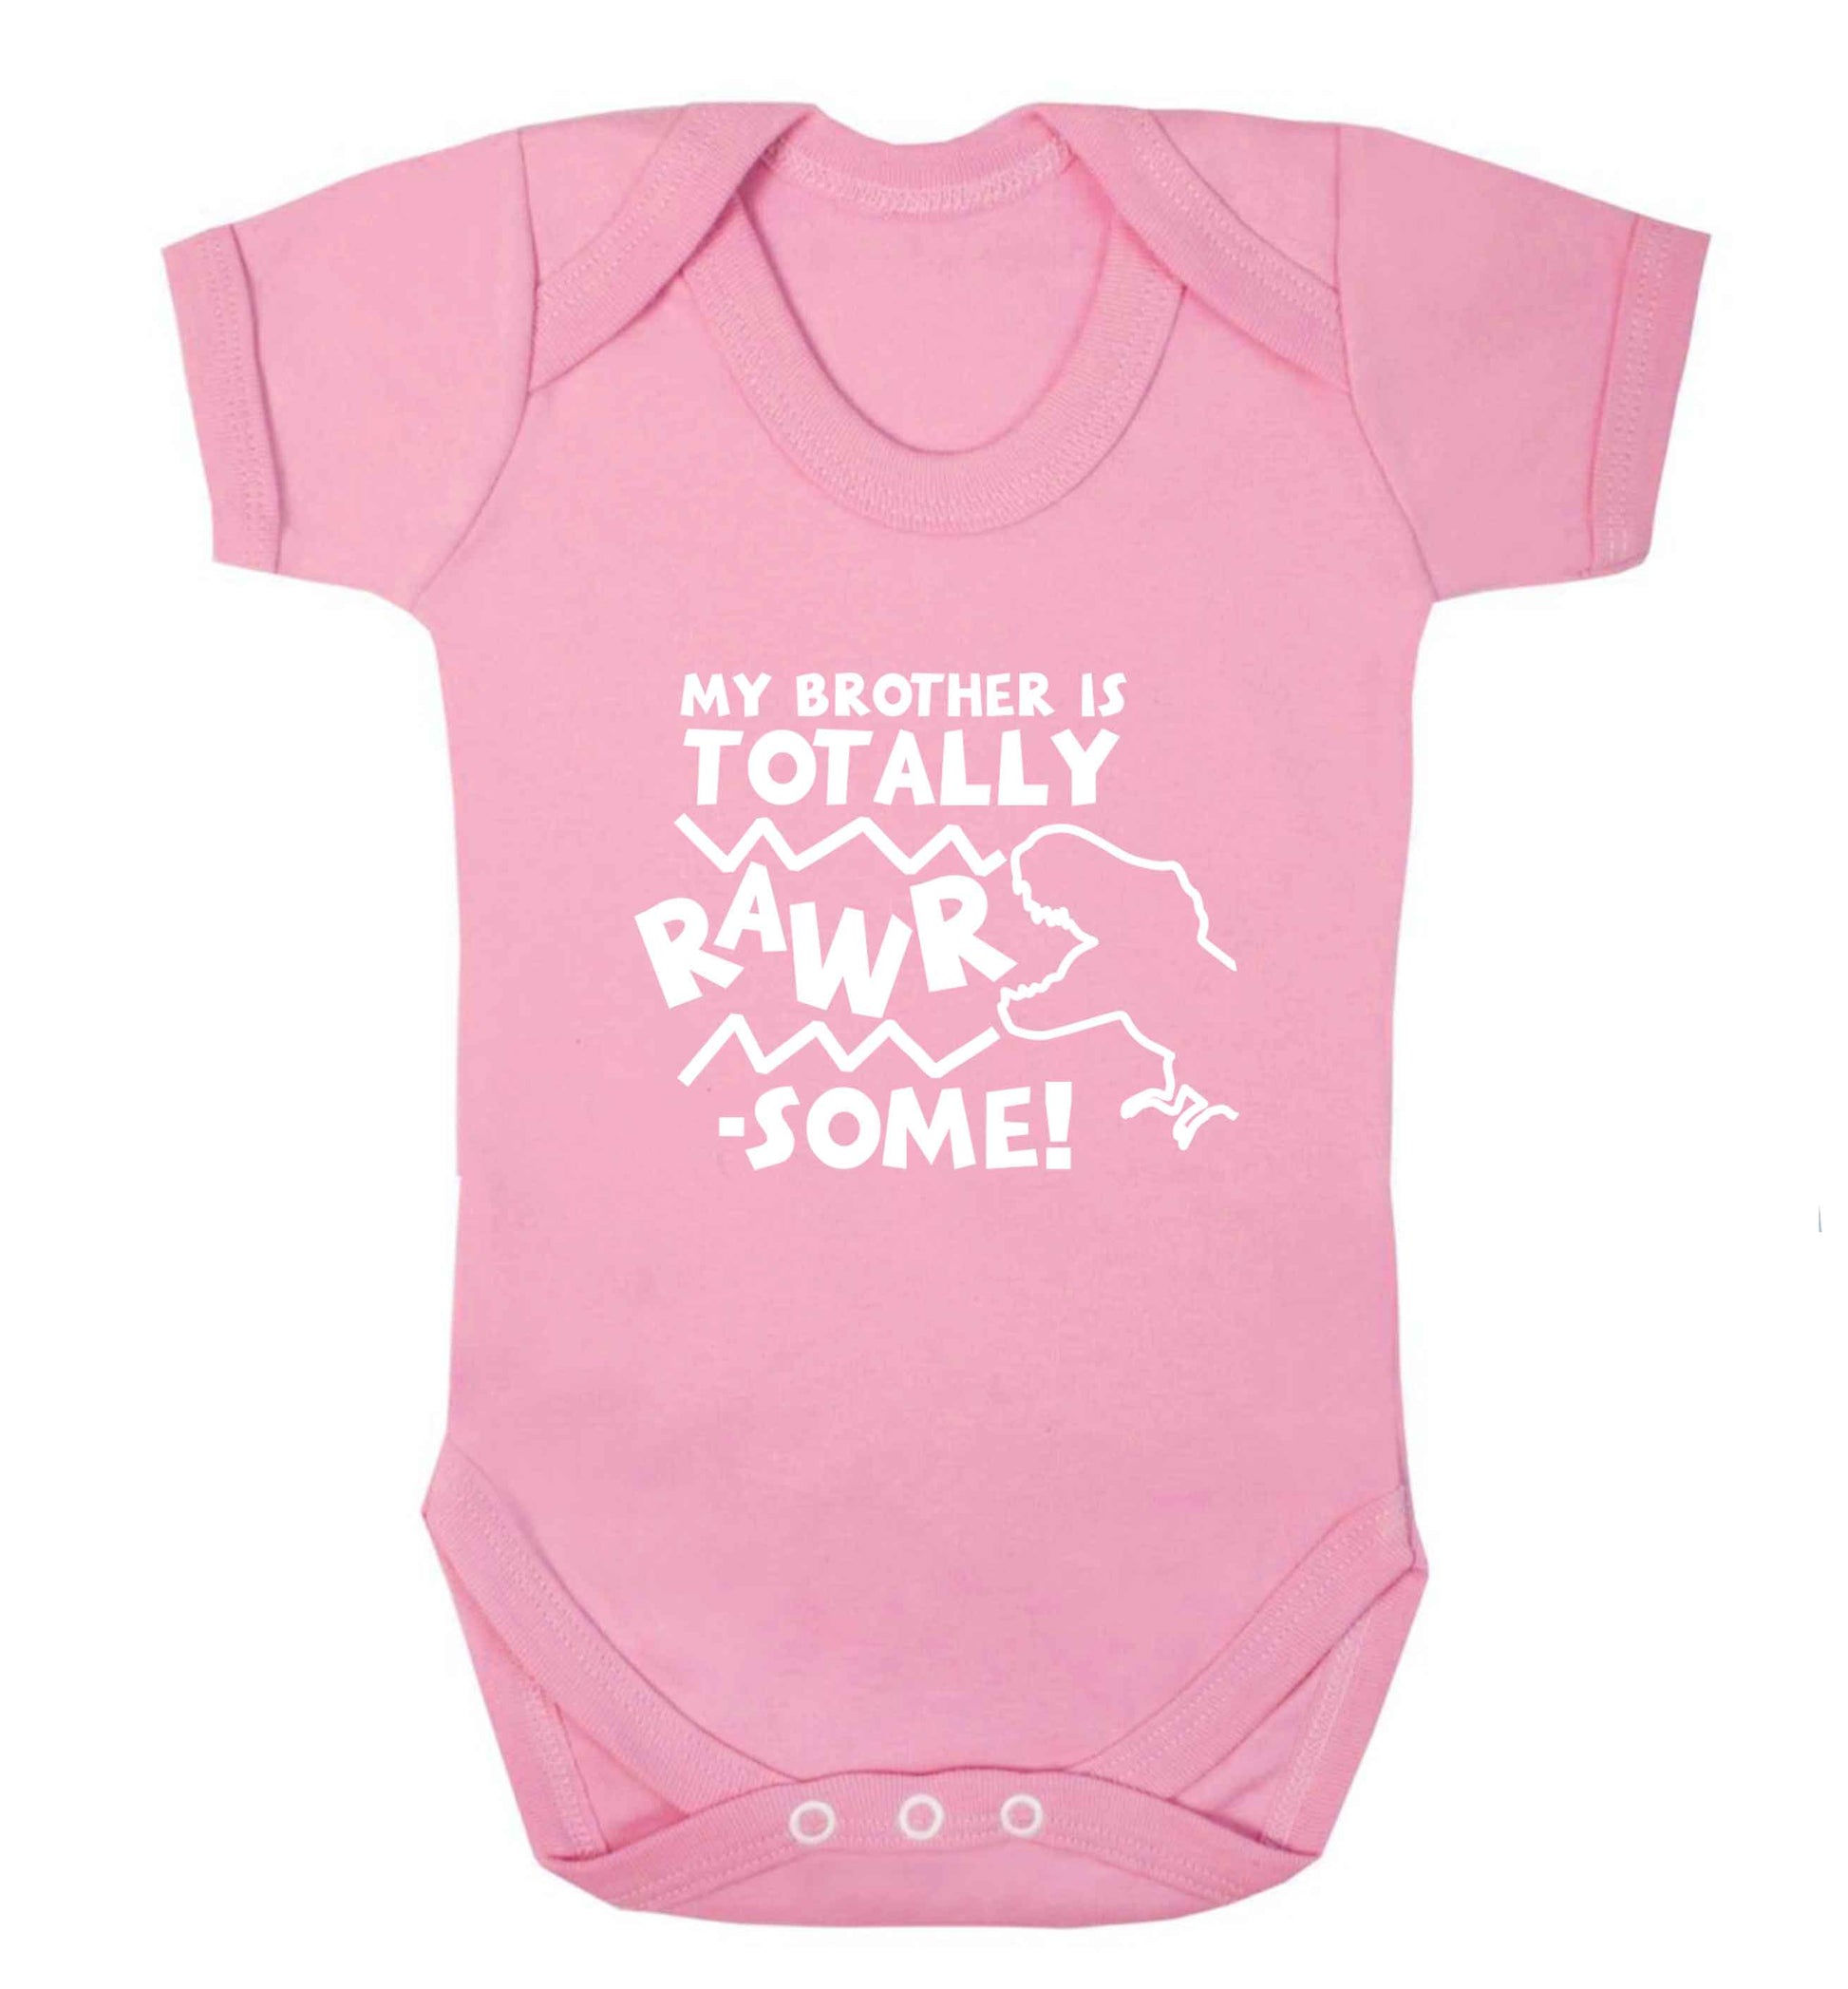 My brother is totally rawrsome baby vest pale pink 18-24 months